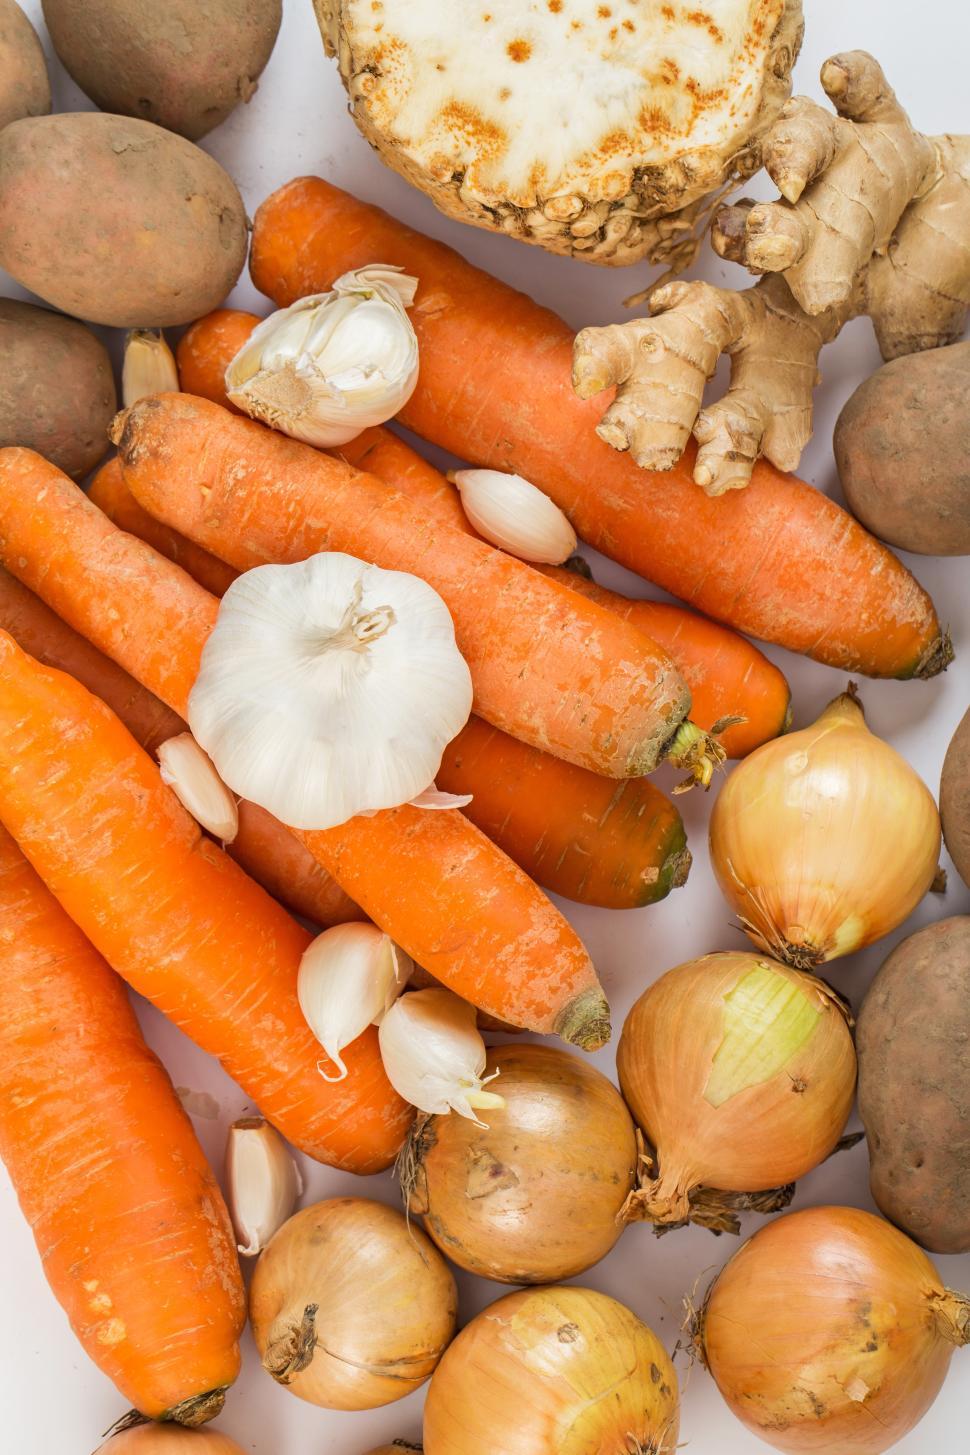 Free Image of Vegetables laid out on a white background 